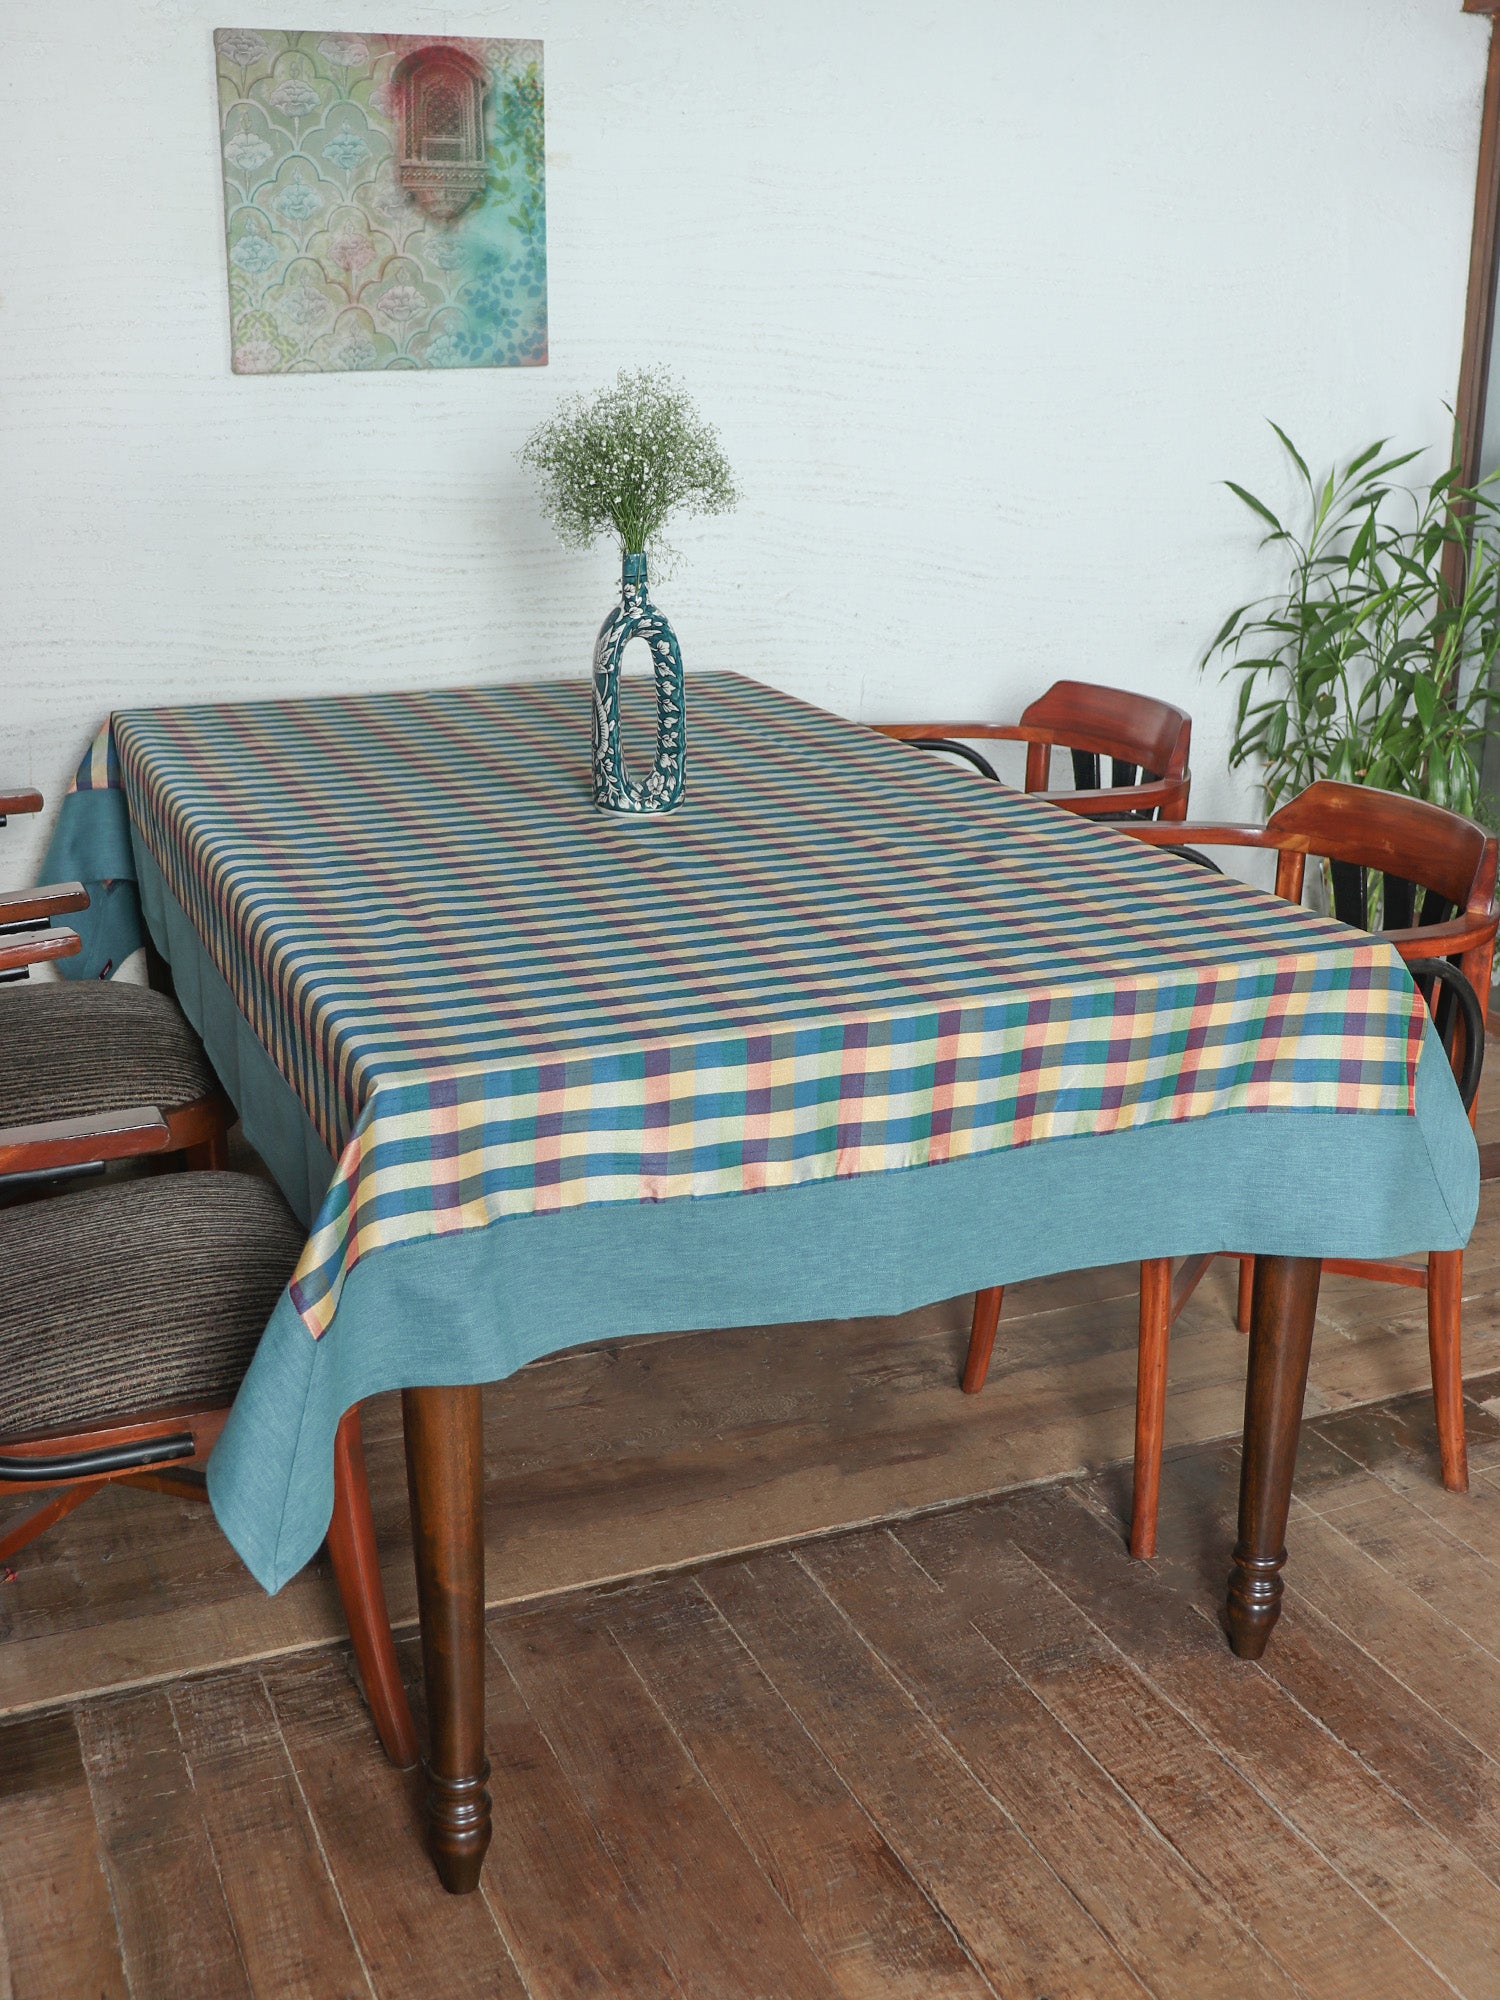 Table Cover Patchwork Border & Checkered Brocade Silk - Blue - 52in x 84in